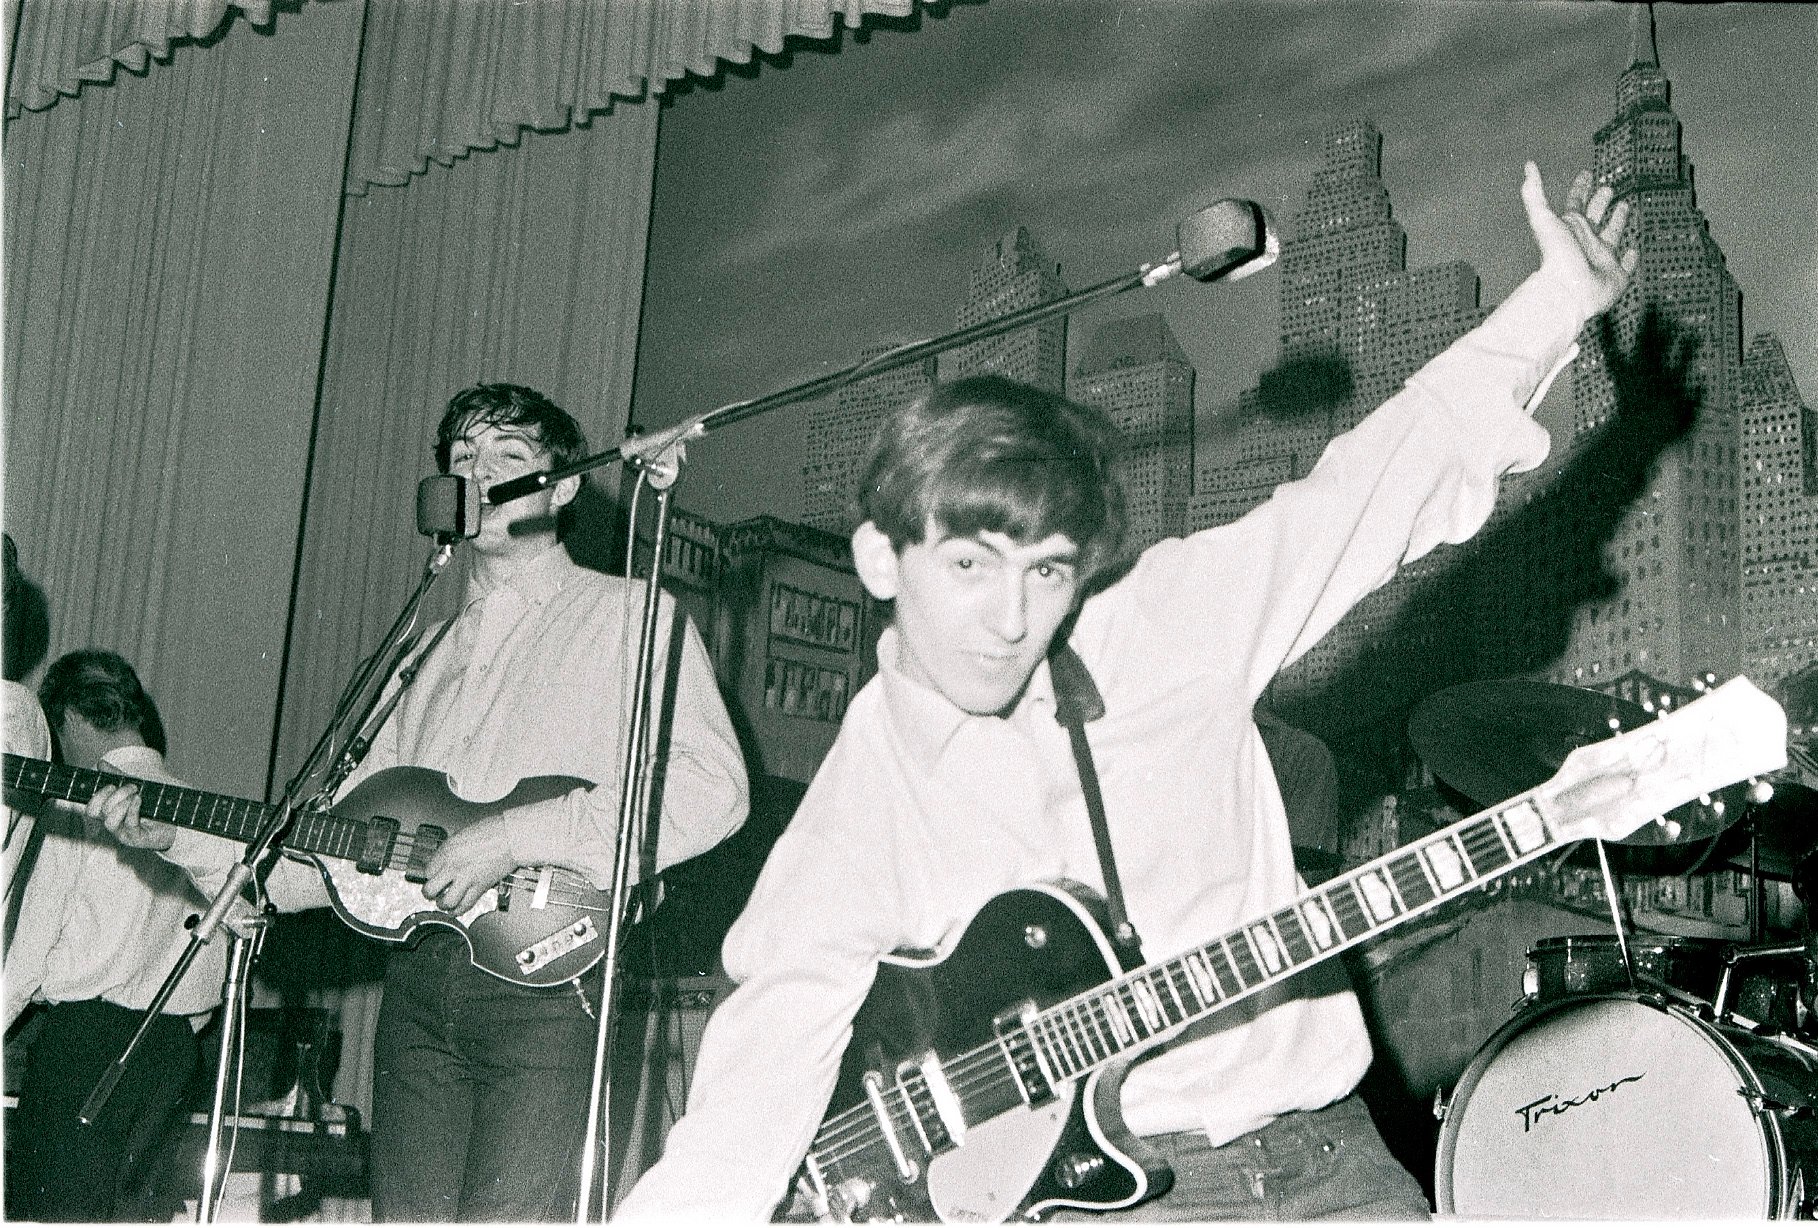 A black and white picture of Paul McCartney and George Harrison onstage in Germany.